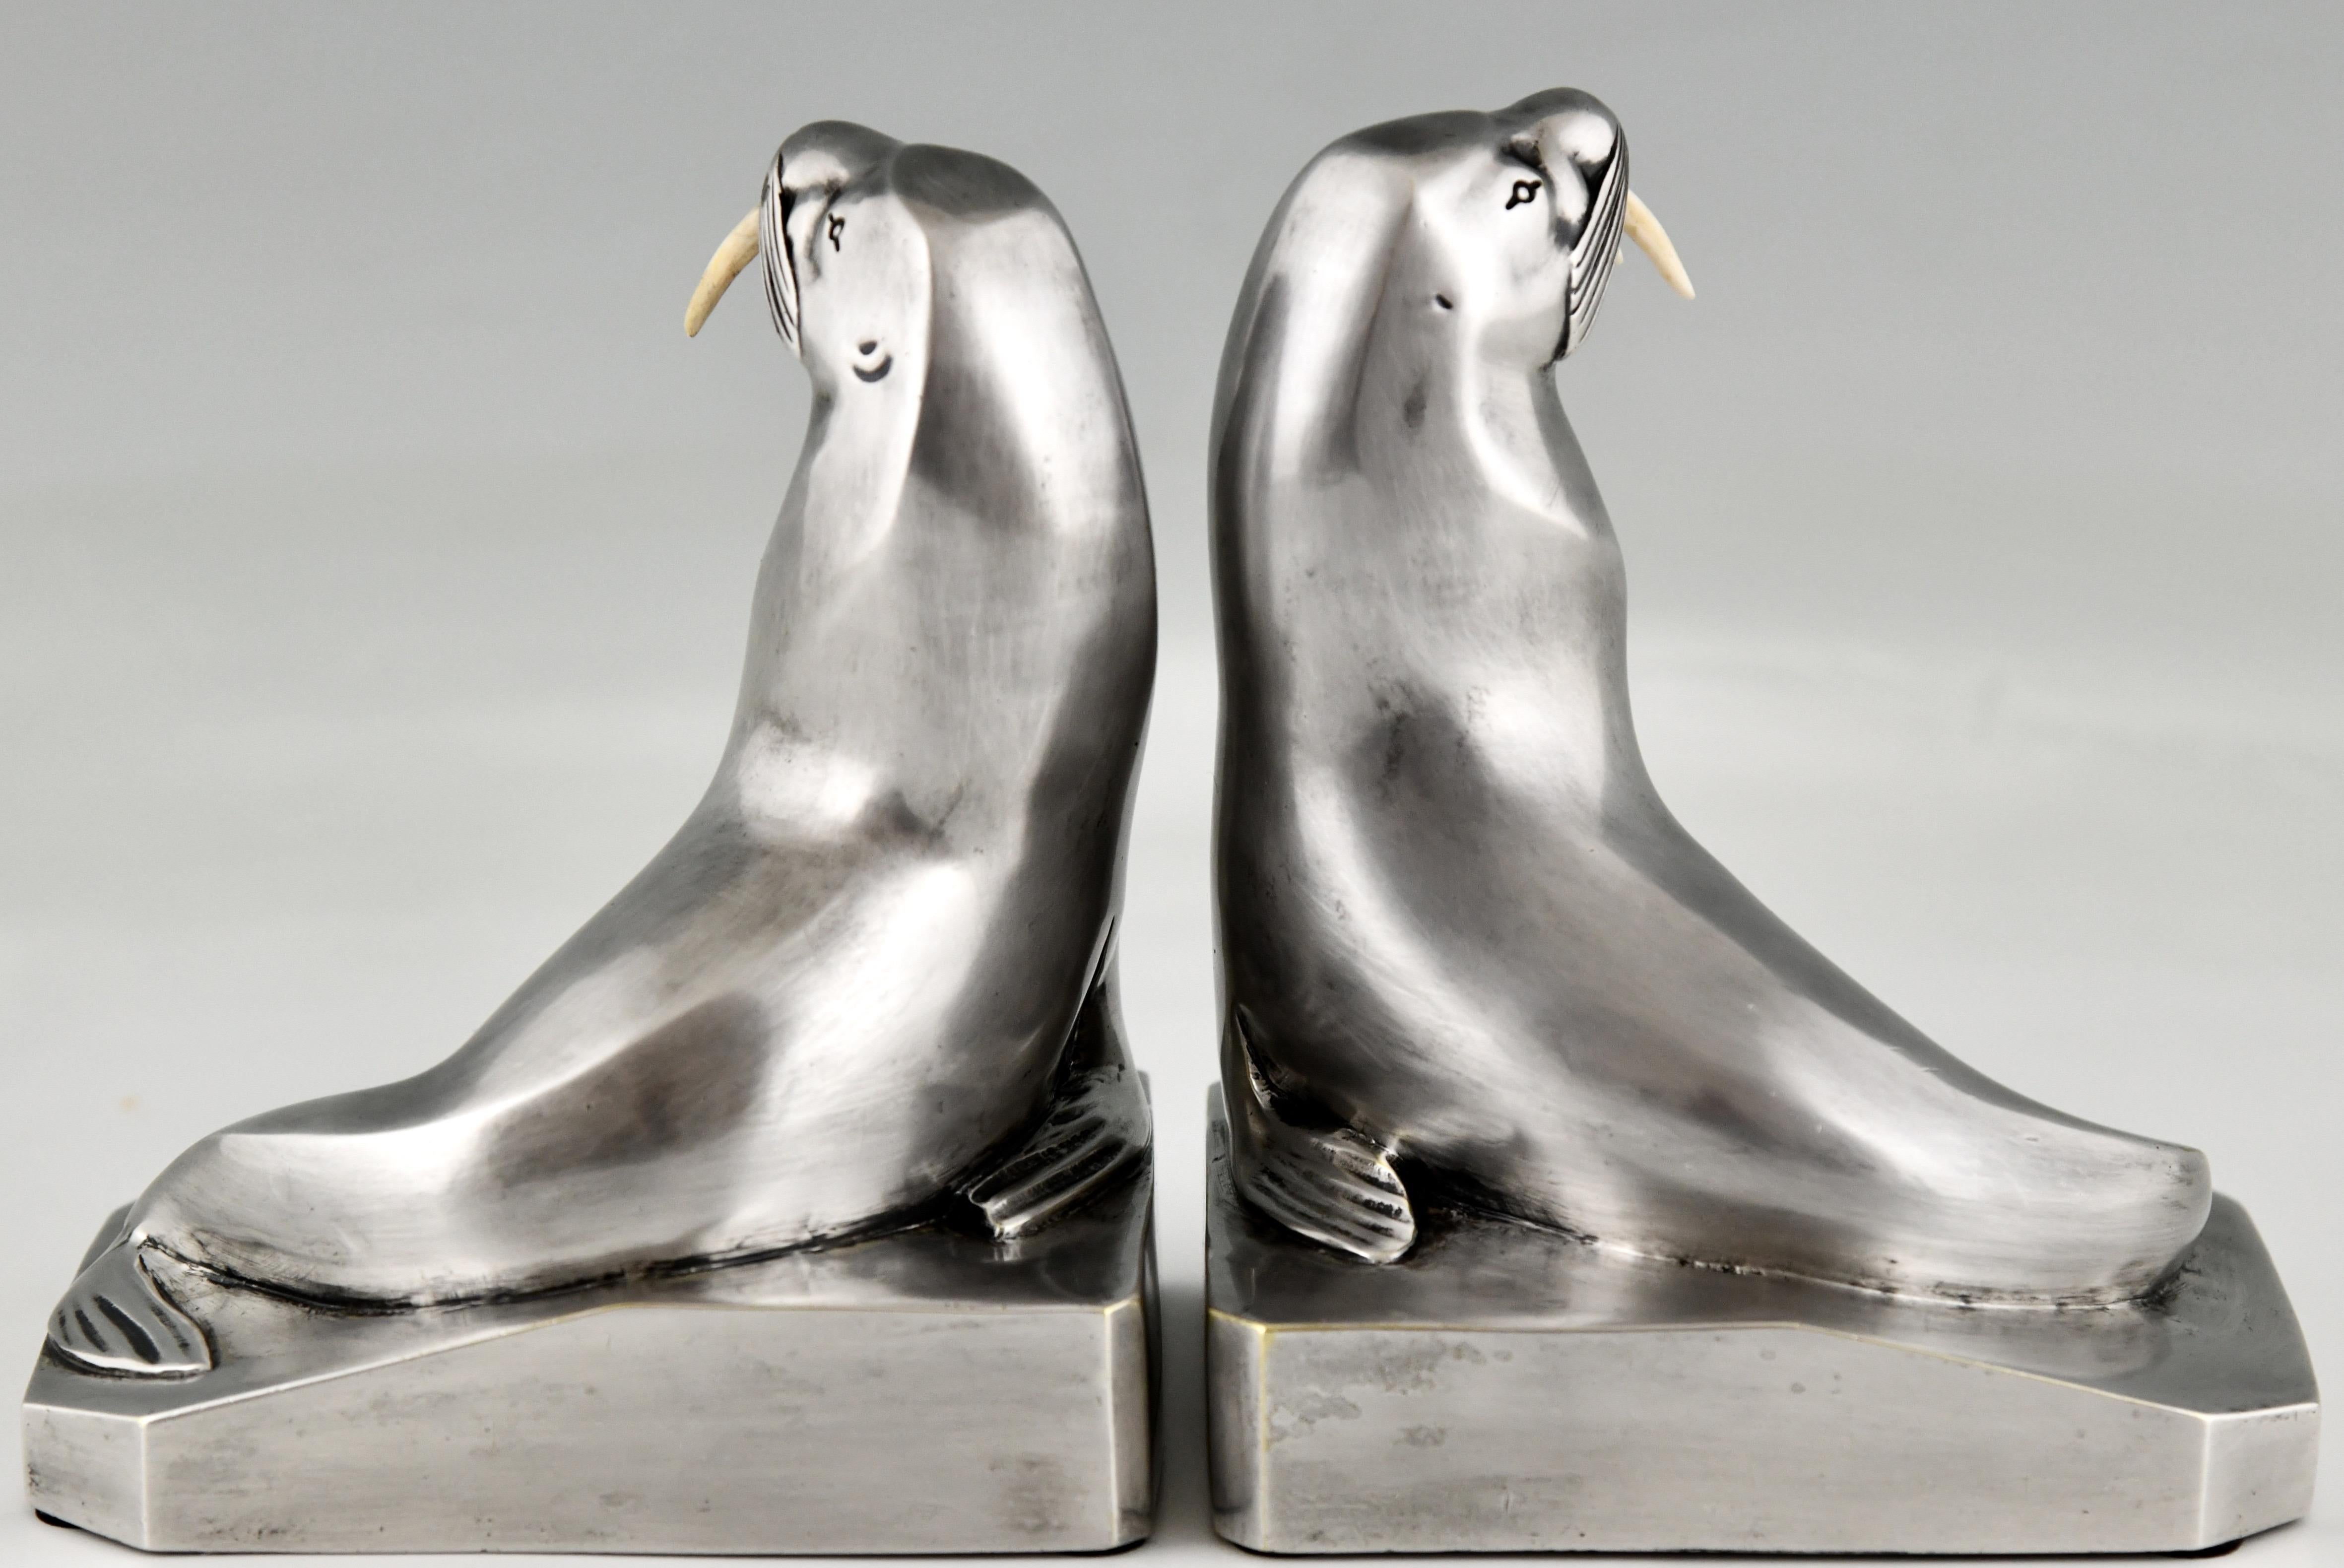 Early 20th Century Art Deco Silvered Bronze Walrus Bookends Signed G.H. Laurent with Foundry Mark